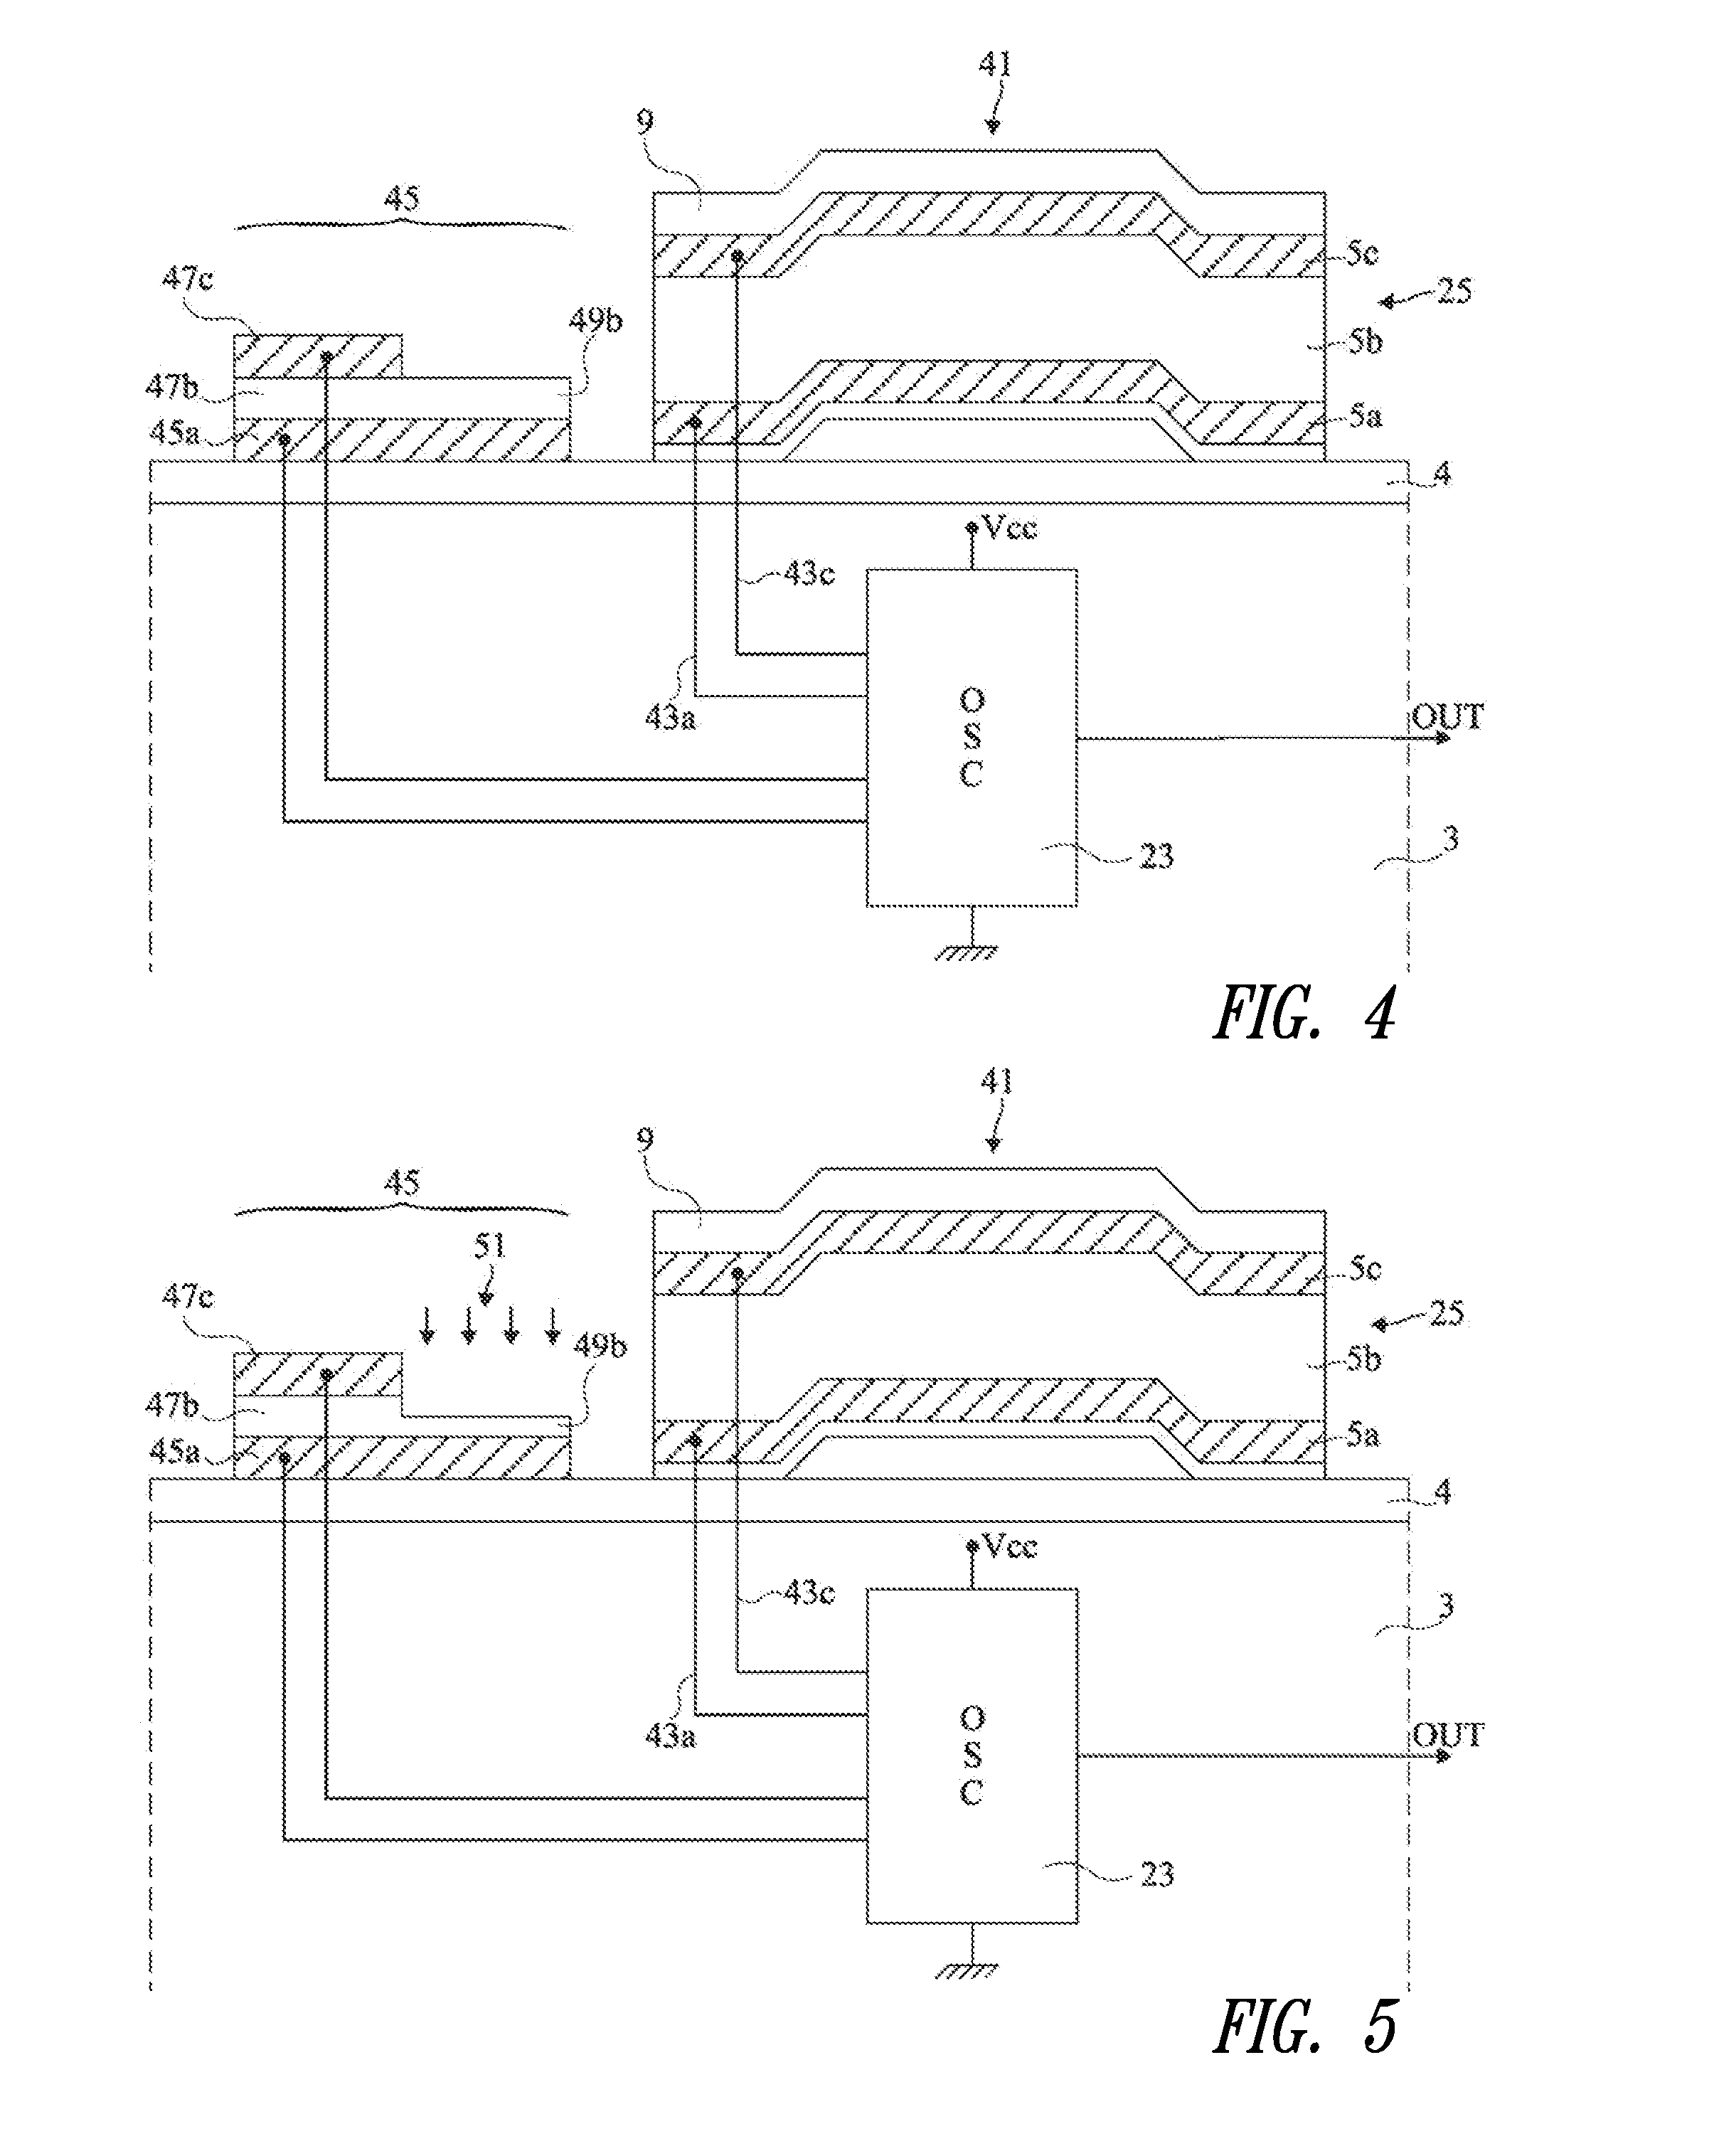 Method of adjustment on manufacturing of a circuit having a resonant element